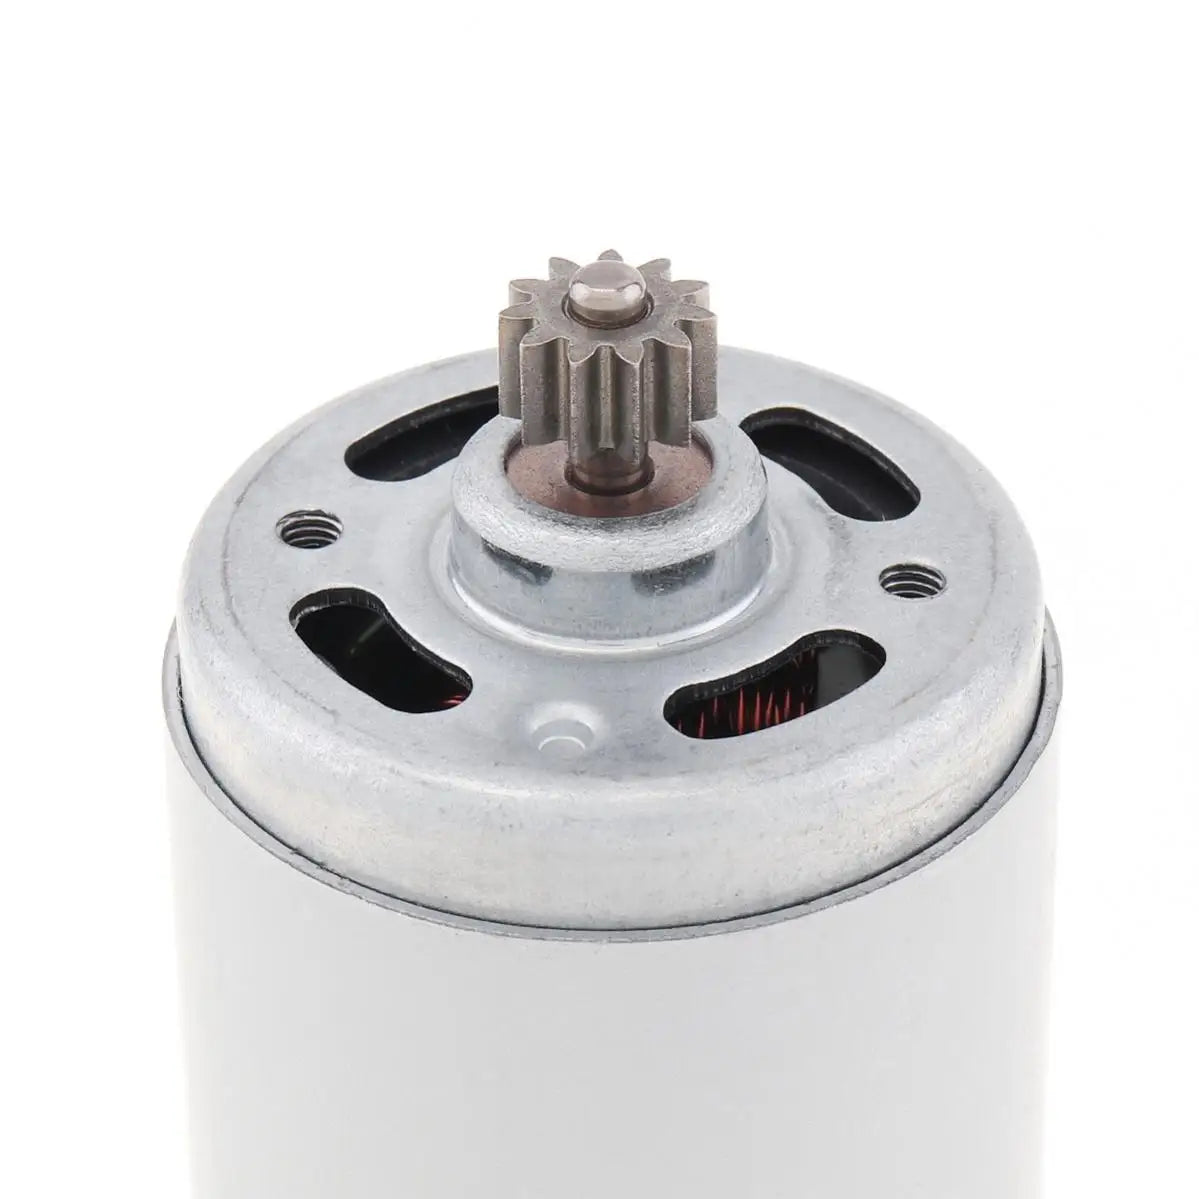 RS550 DC Motor 11 Teeth 10.8V 19500 RPM Micro Motor with 11 Tooth High Torque Gear Box